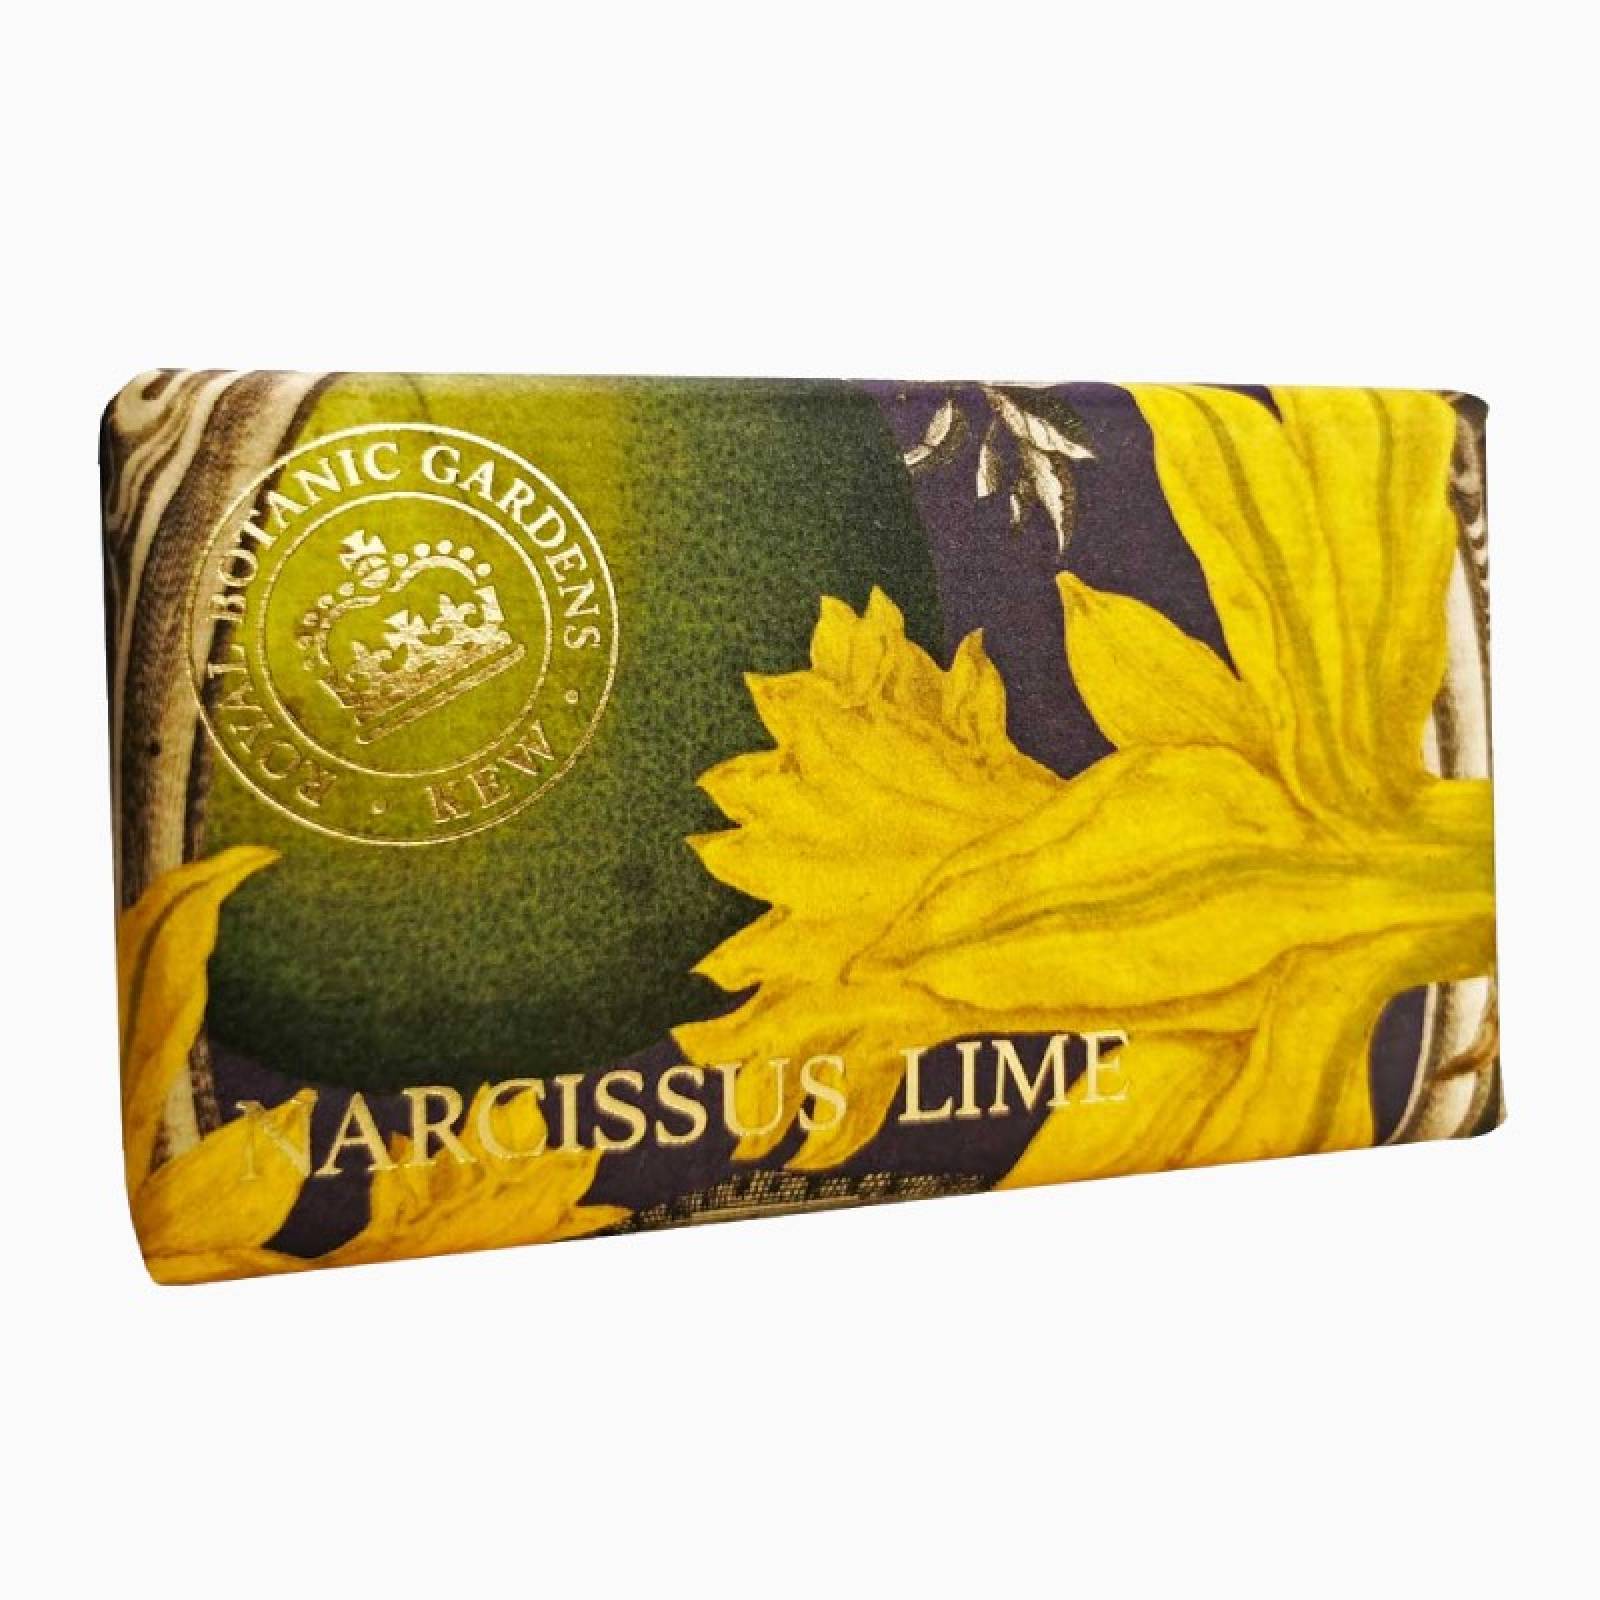 Narcissus Lime Kew Gardens Soap 240g